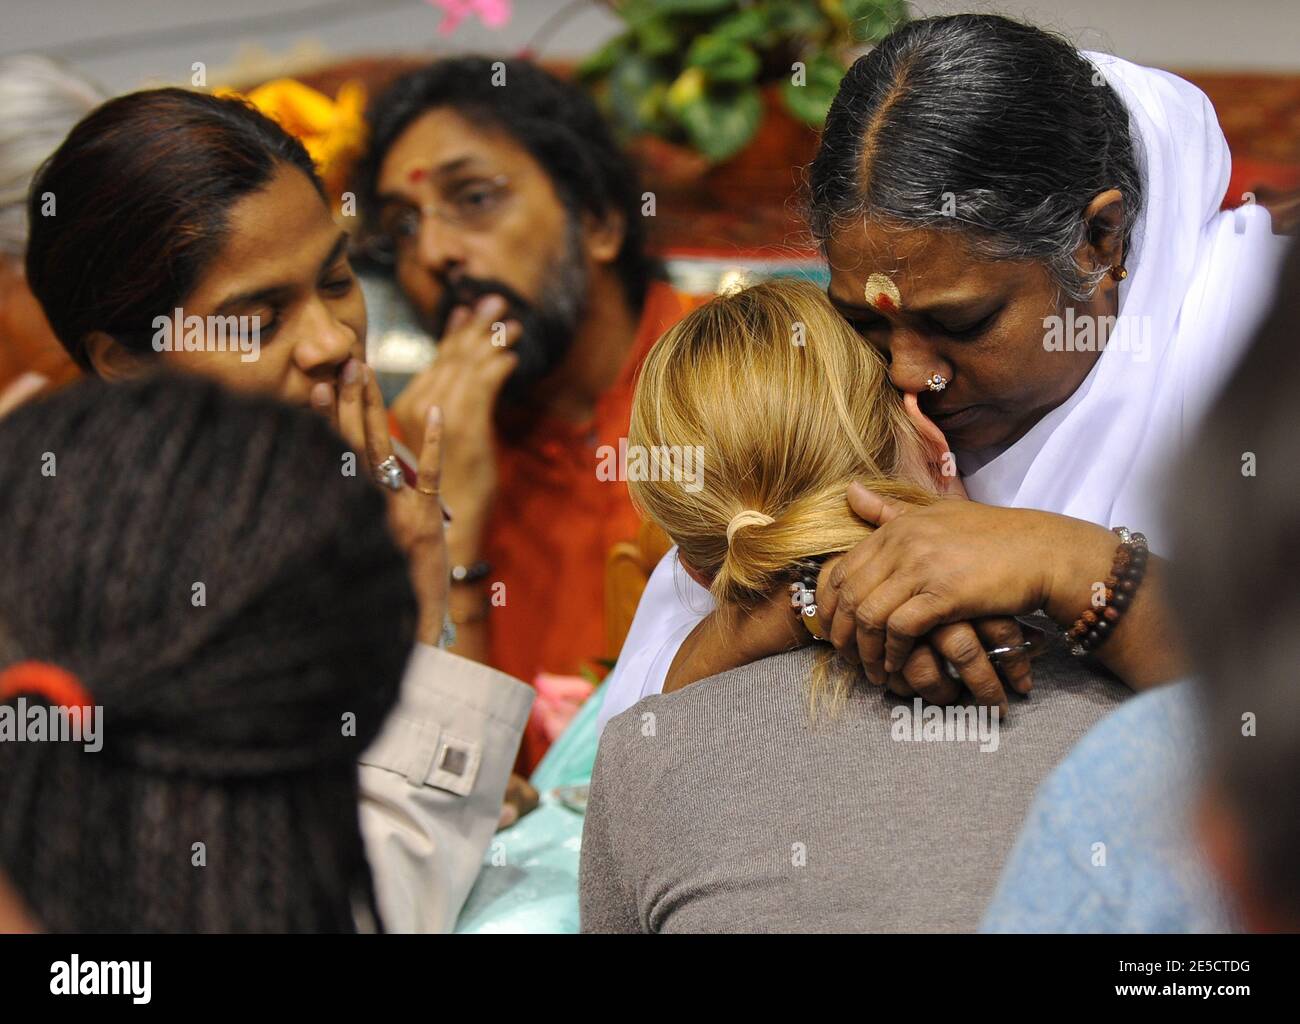 Indian spiritual leader Mata Amritanandamayi as known as Amma hugs a woman  in Cergy-Pontoise, near Paris, France on October 24, 2008, during a few  days trip in France. Amma offers a hug